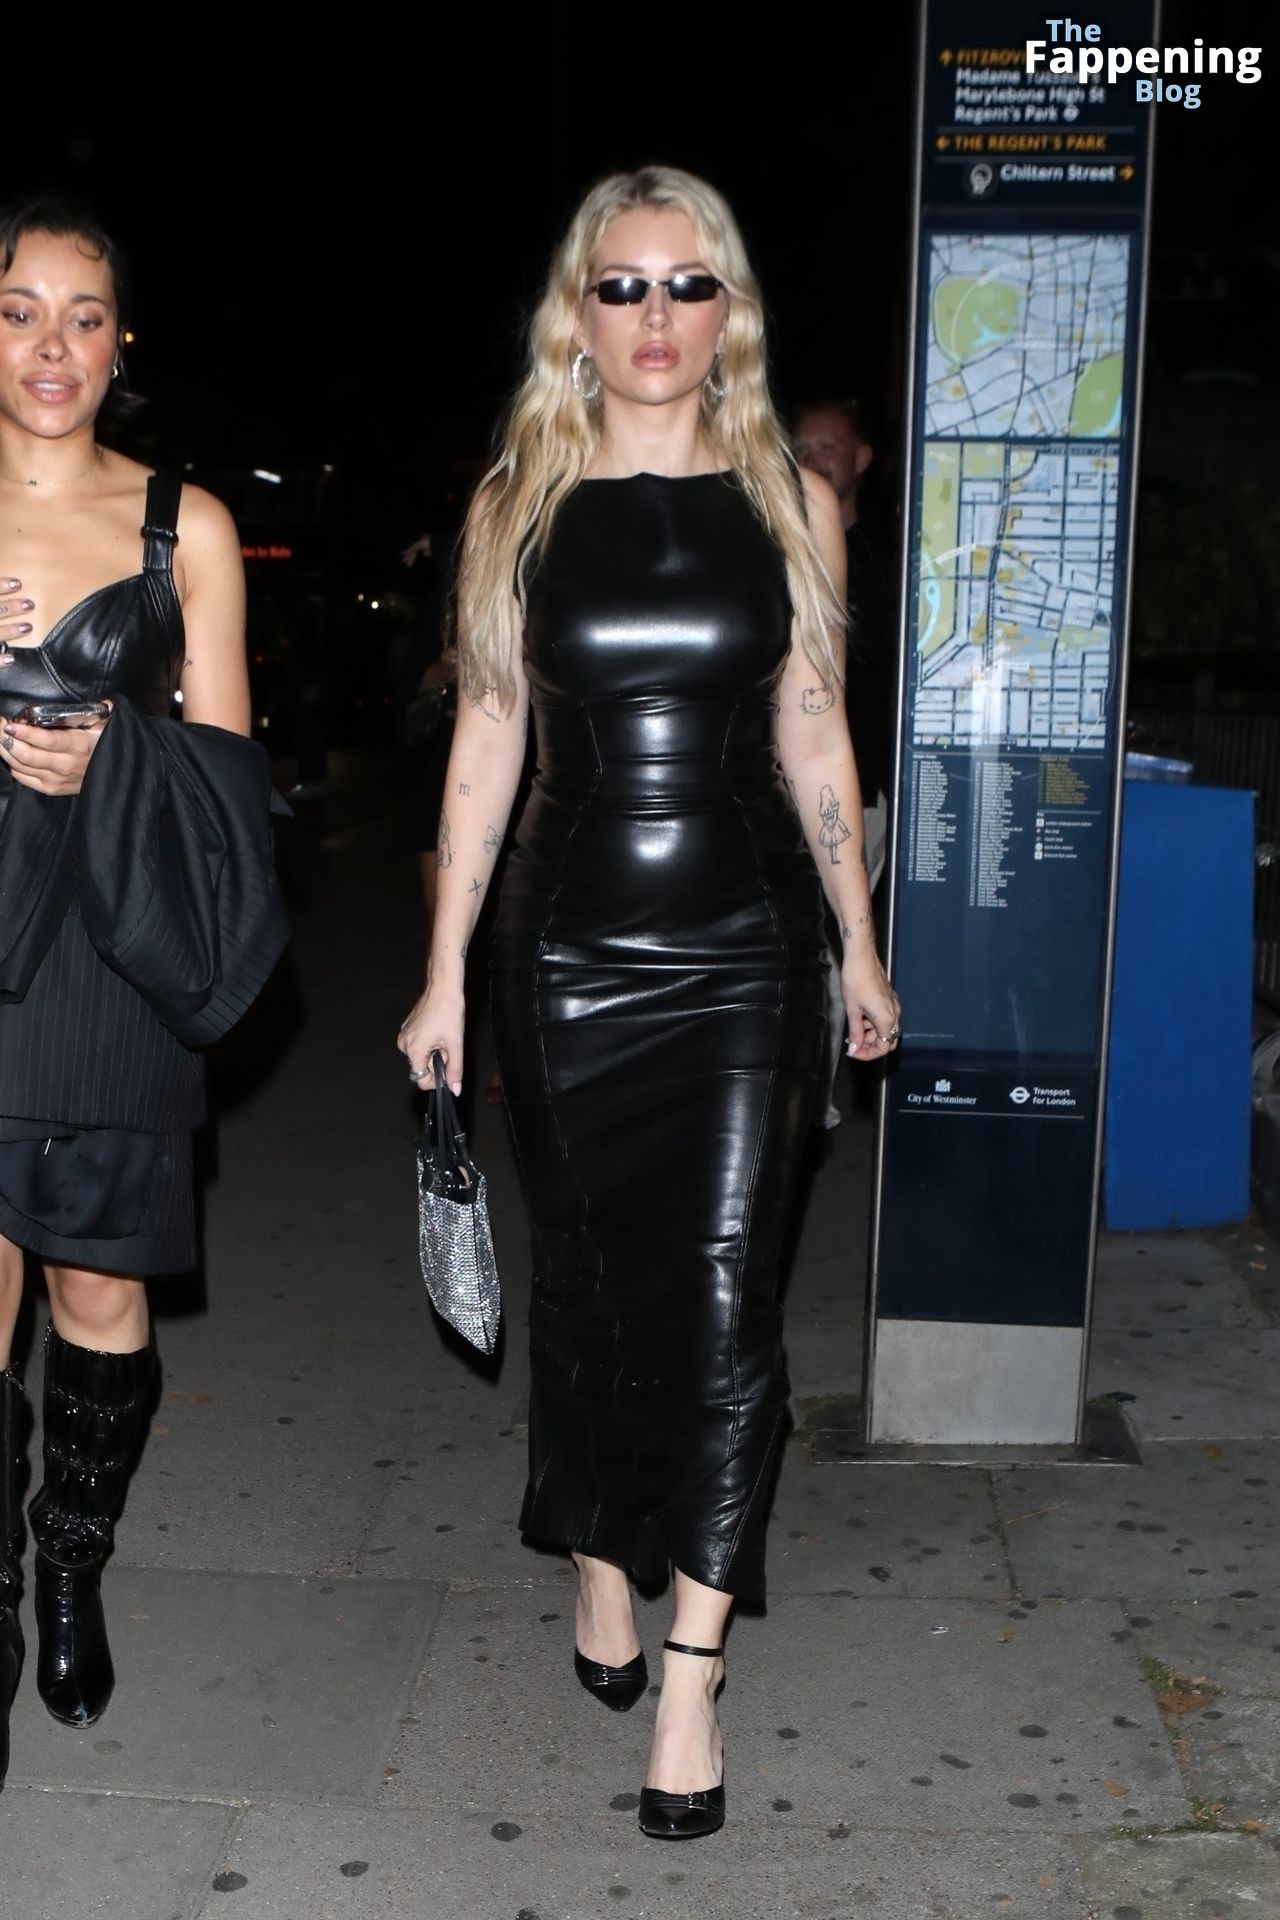 Lottie Moss Looks Hot in a Leather Dress as She Exits Rita Ora’s Fashion Event in London (68 Photos)